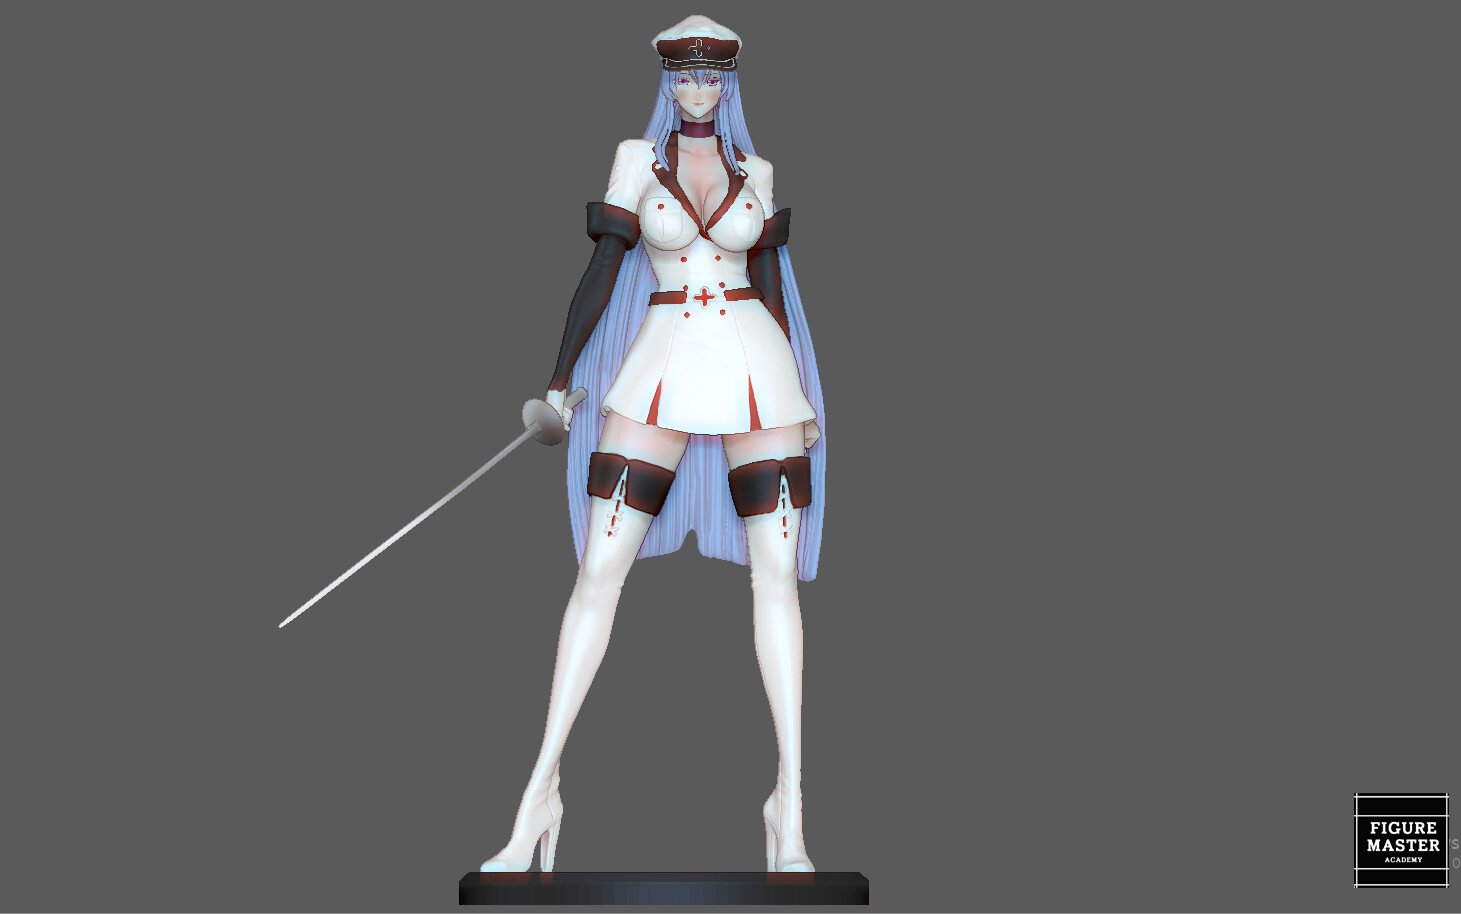 Anime Characters - A 3D model collection by fleshmobproductions - Sketchfab